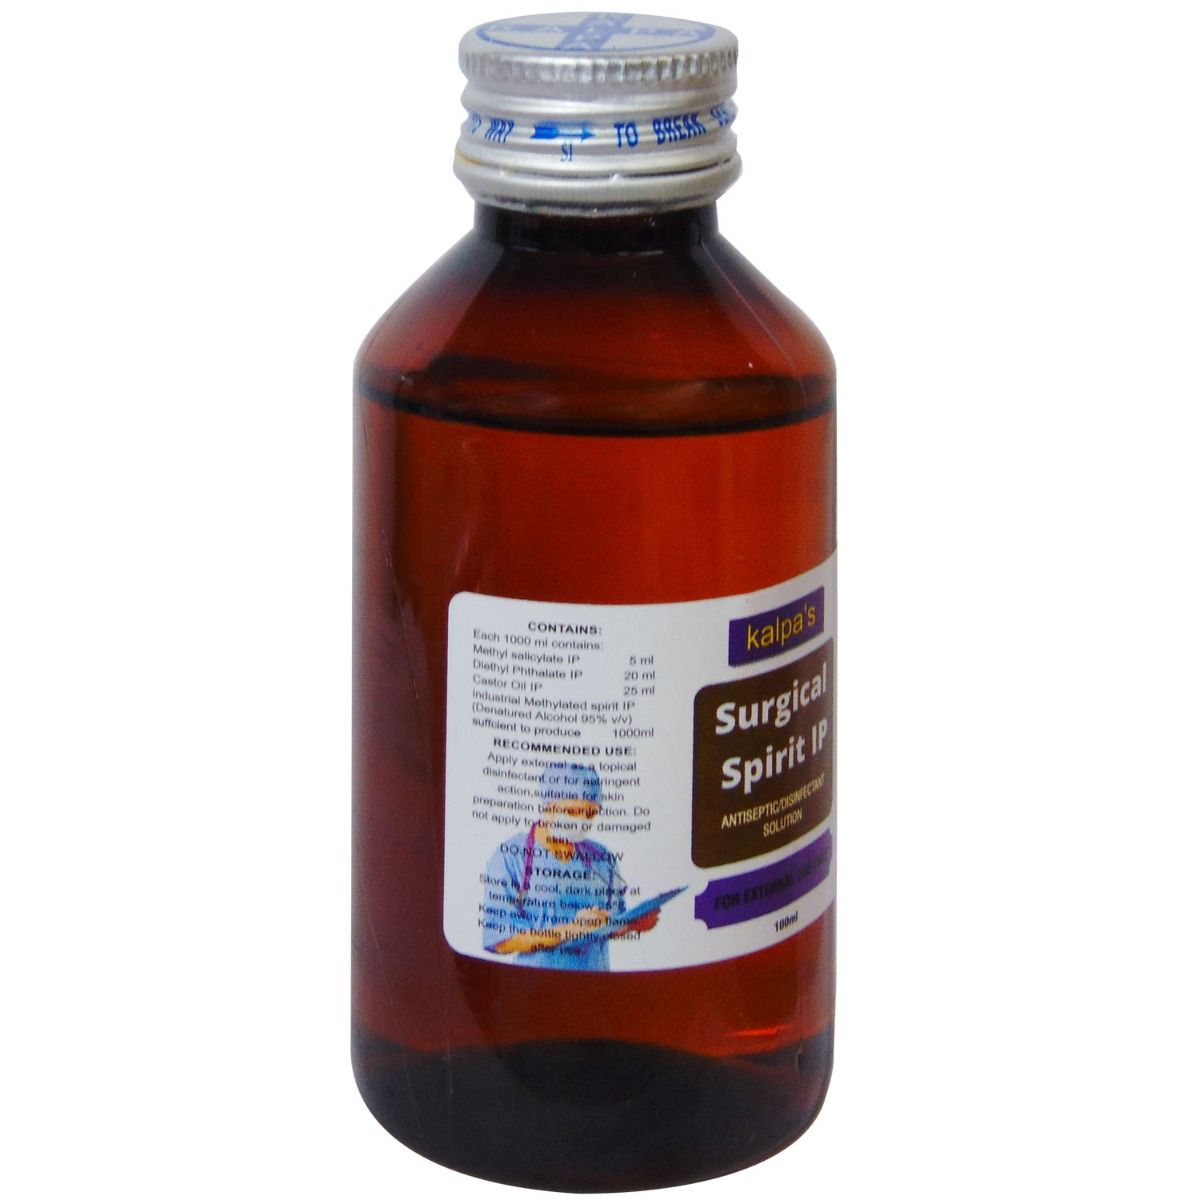 Surgical Spirit 100ml, Pack of 1 